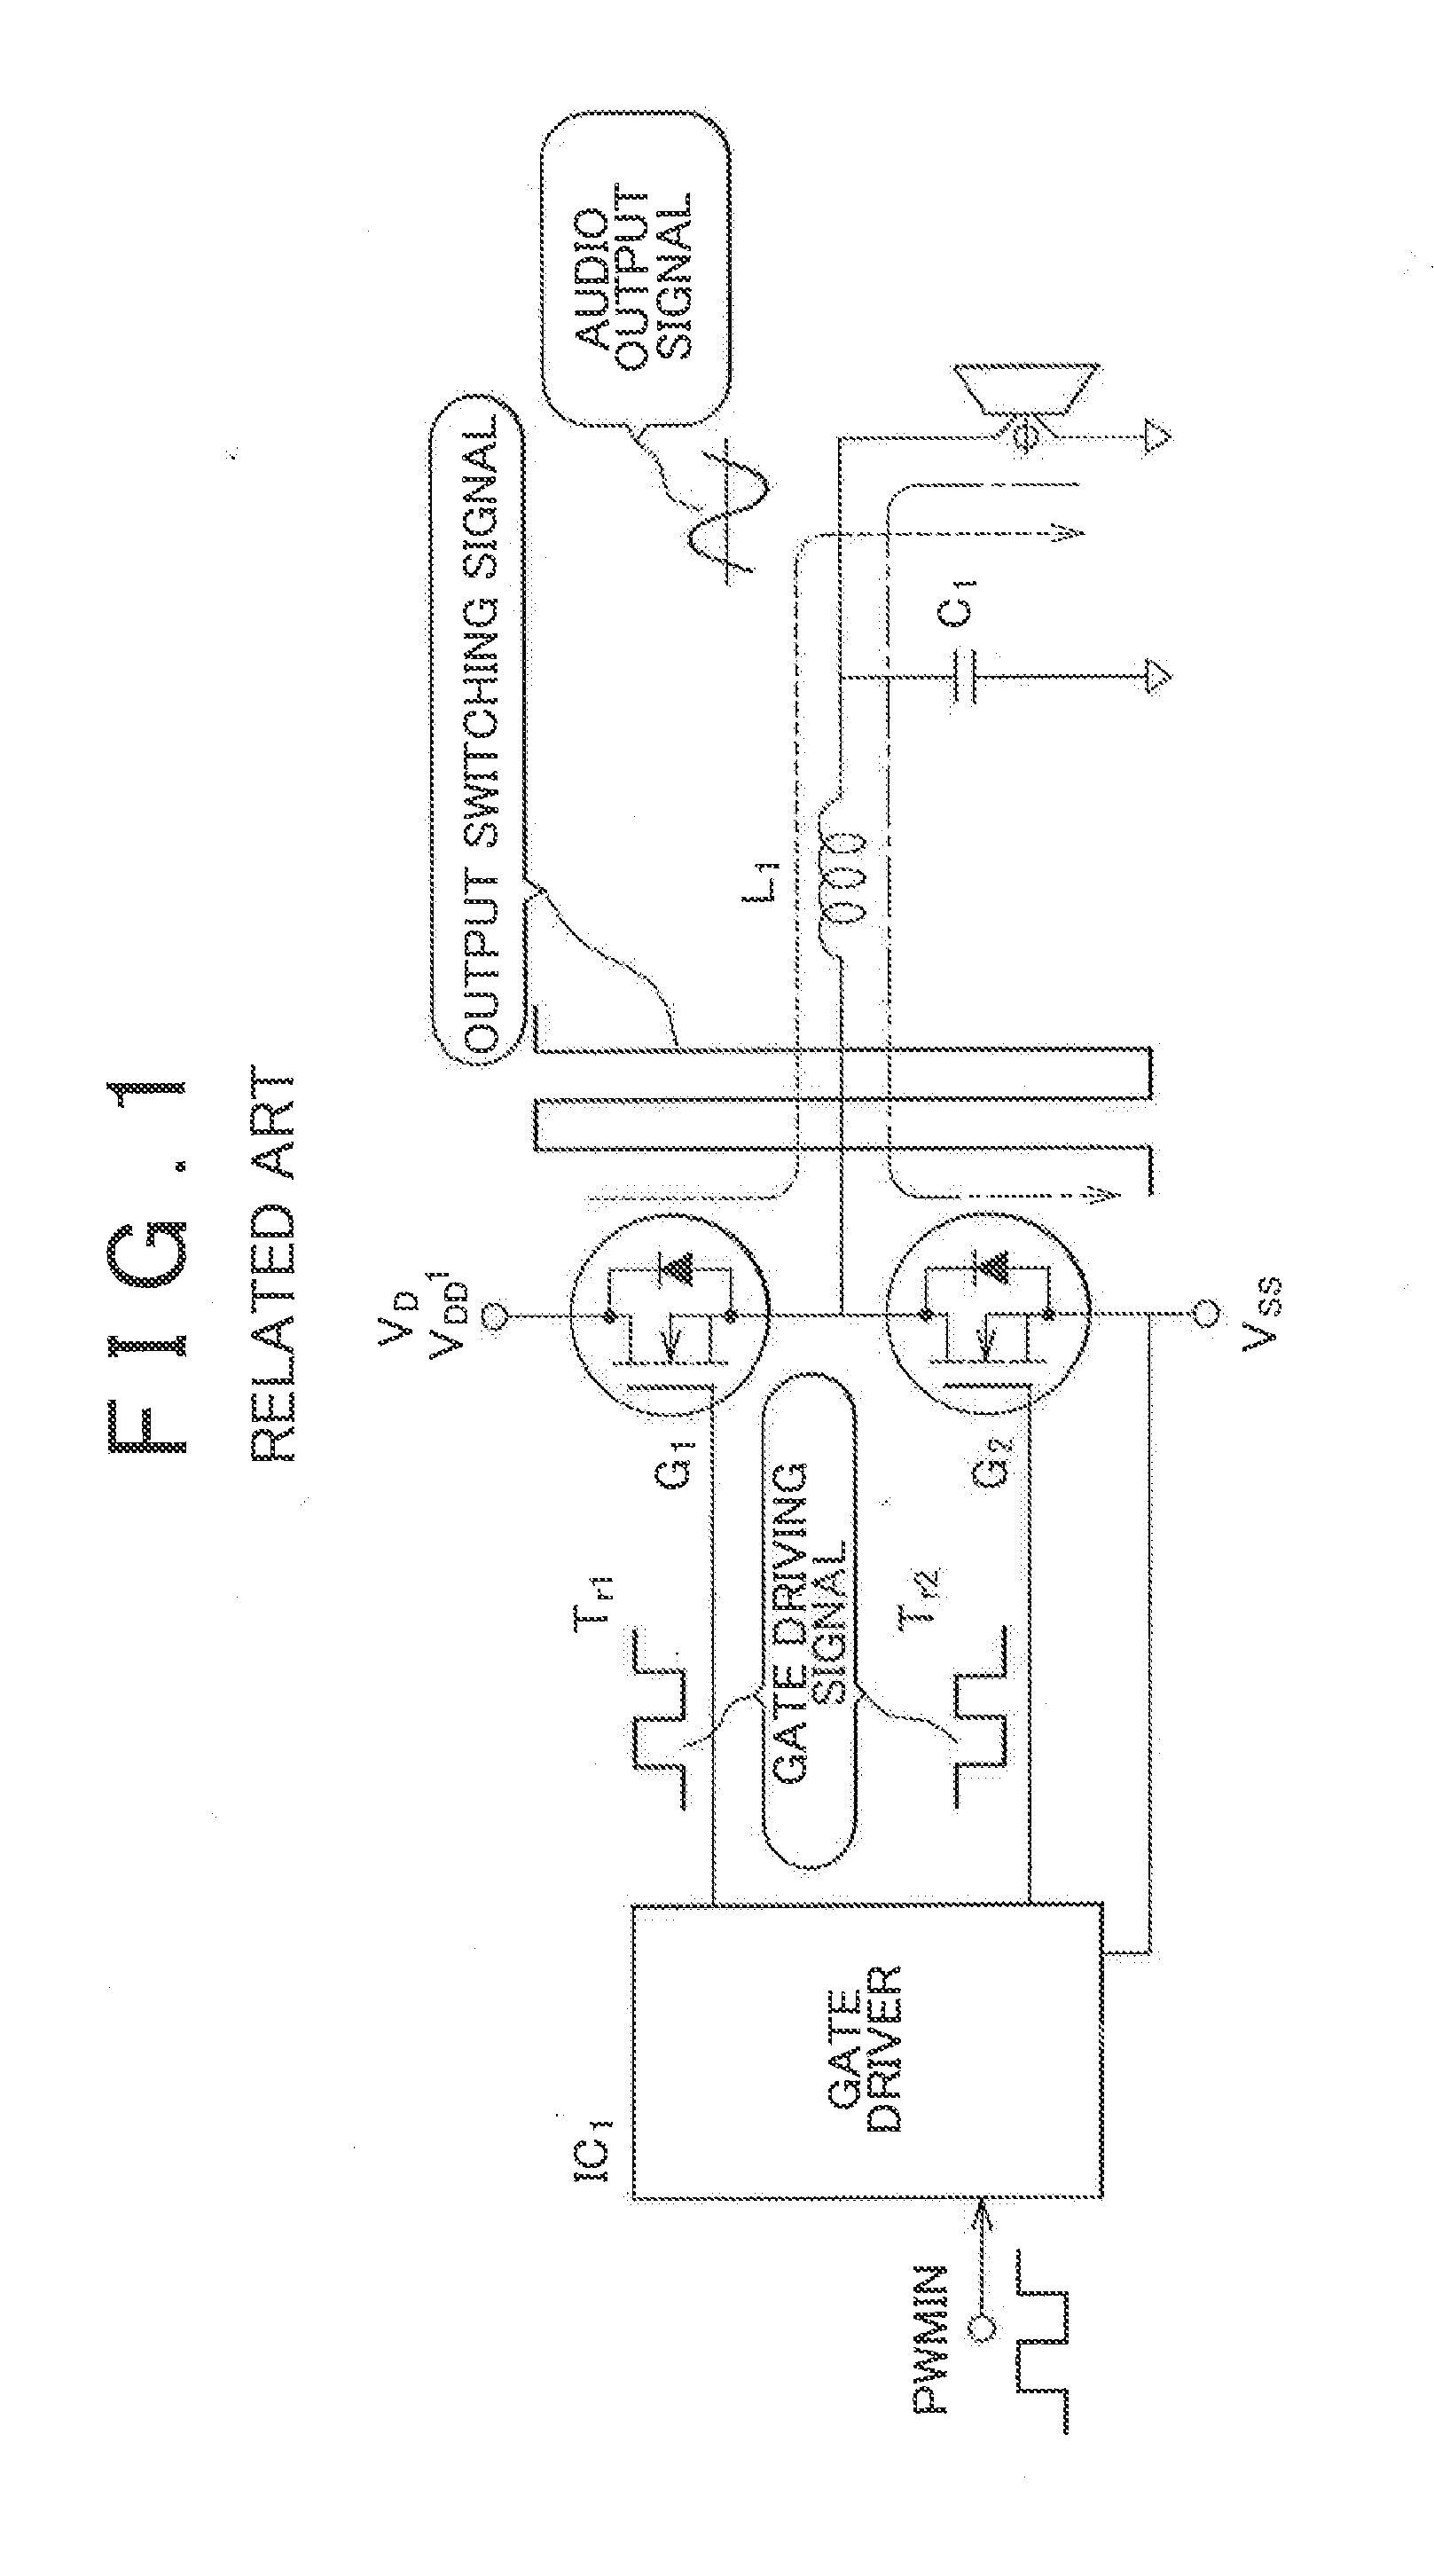 Amplifier and amplifying method